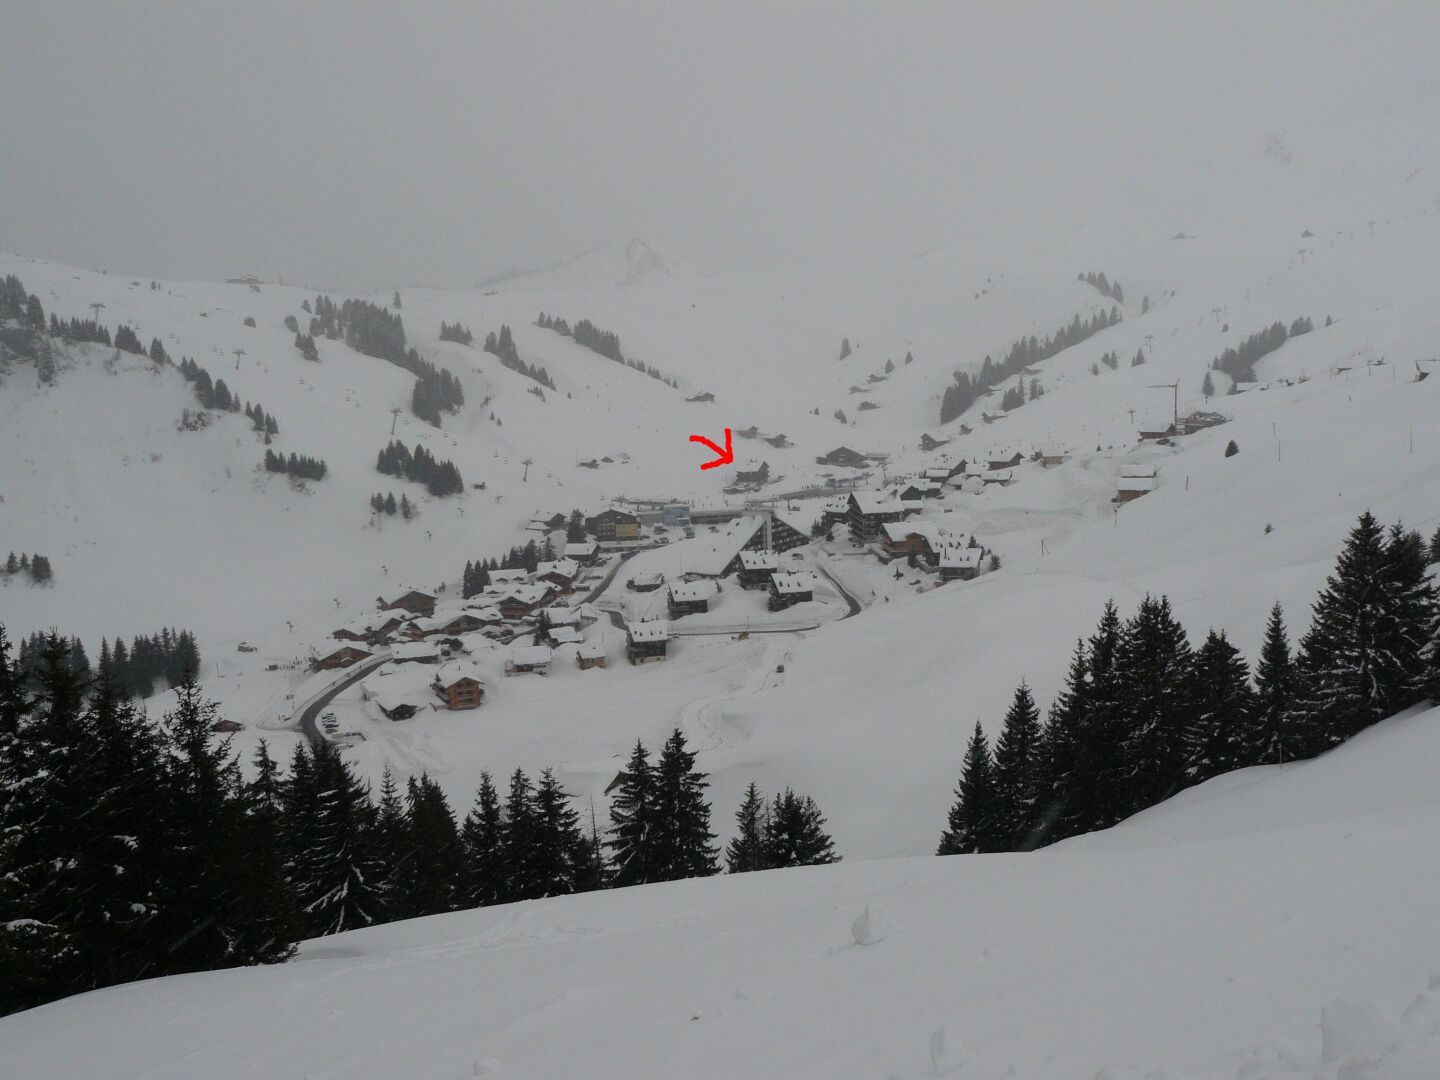 Our chalet in the middle of the pistes.